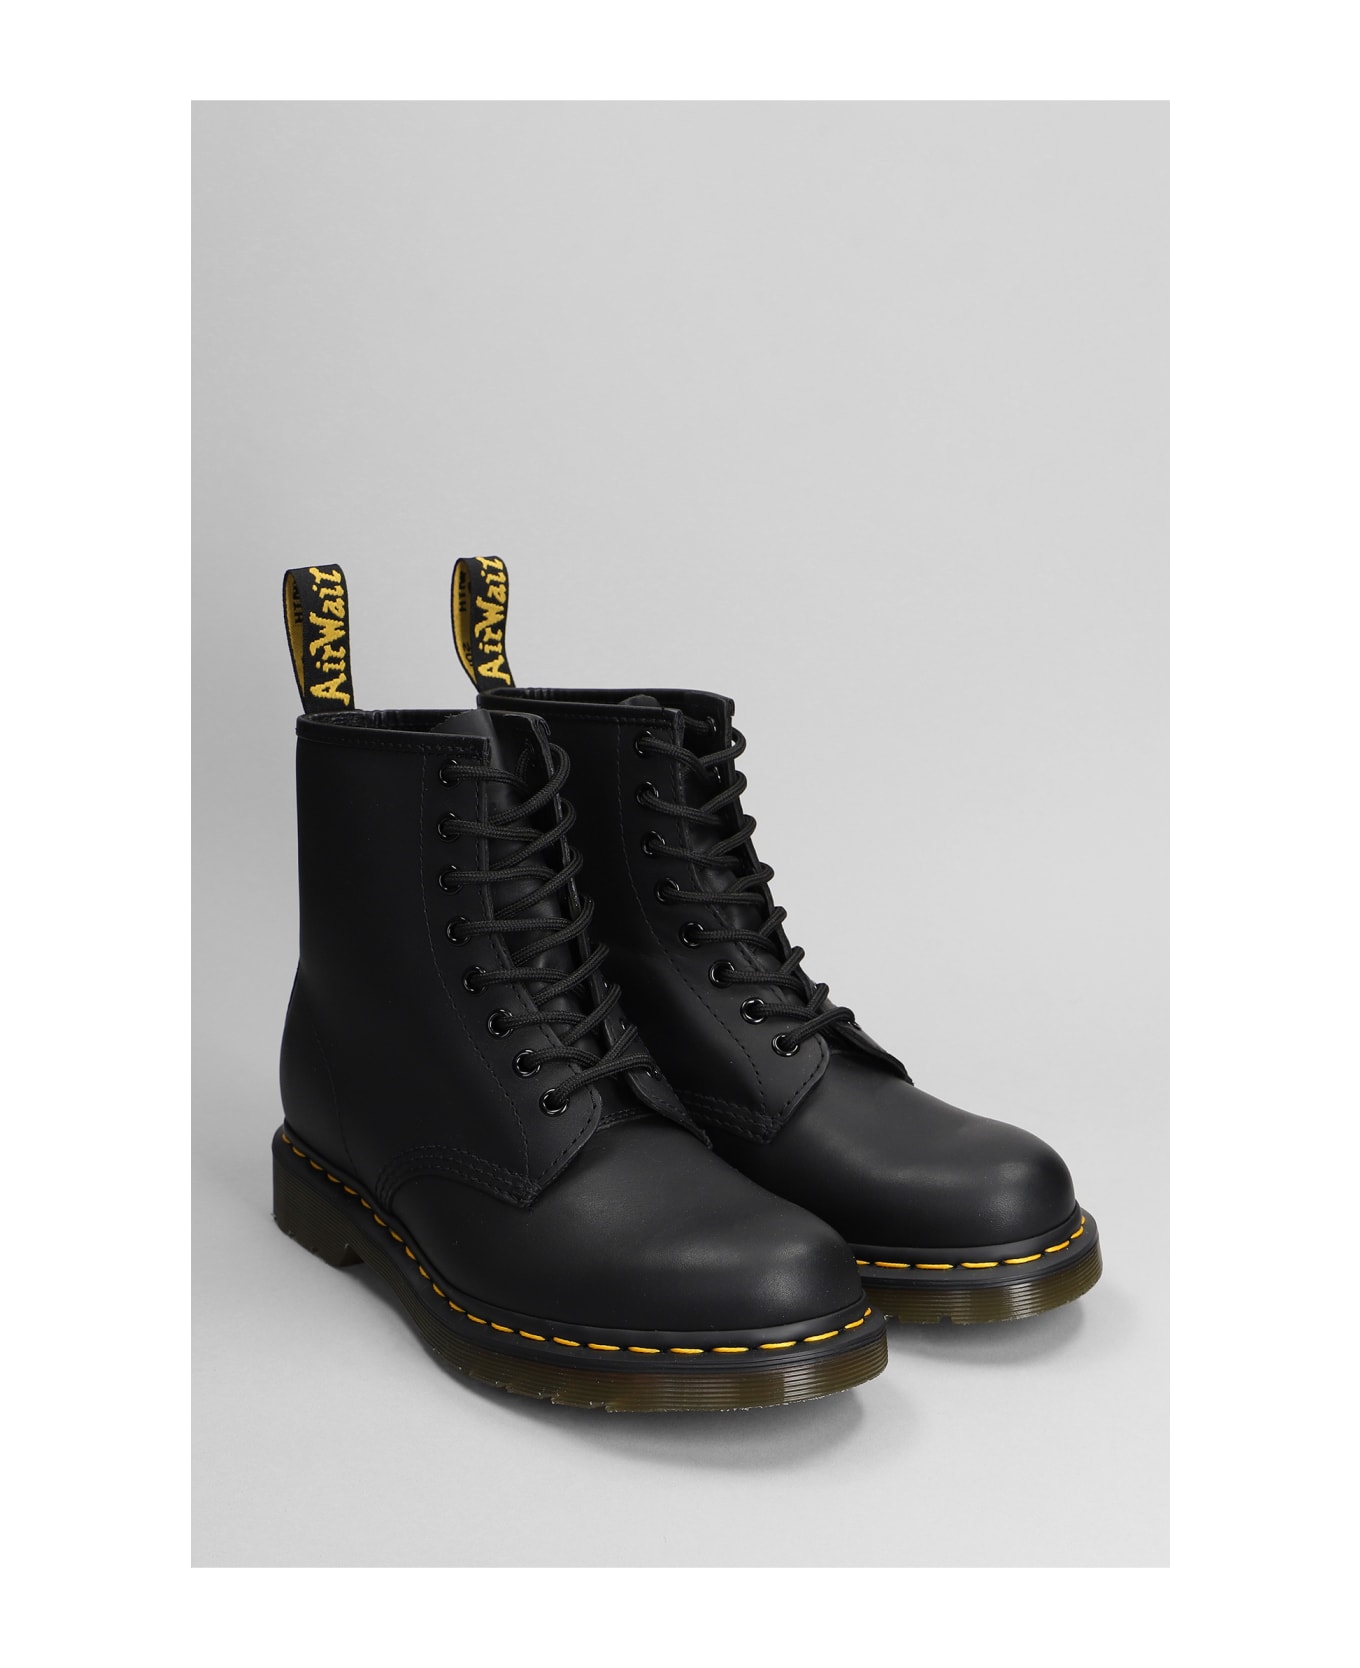 Dr. Martens 1460 Greasy Combat Boots In Black Leather - black ブーツ